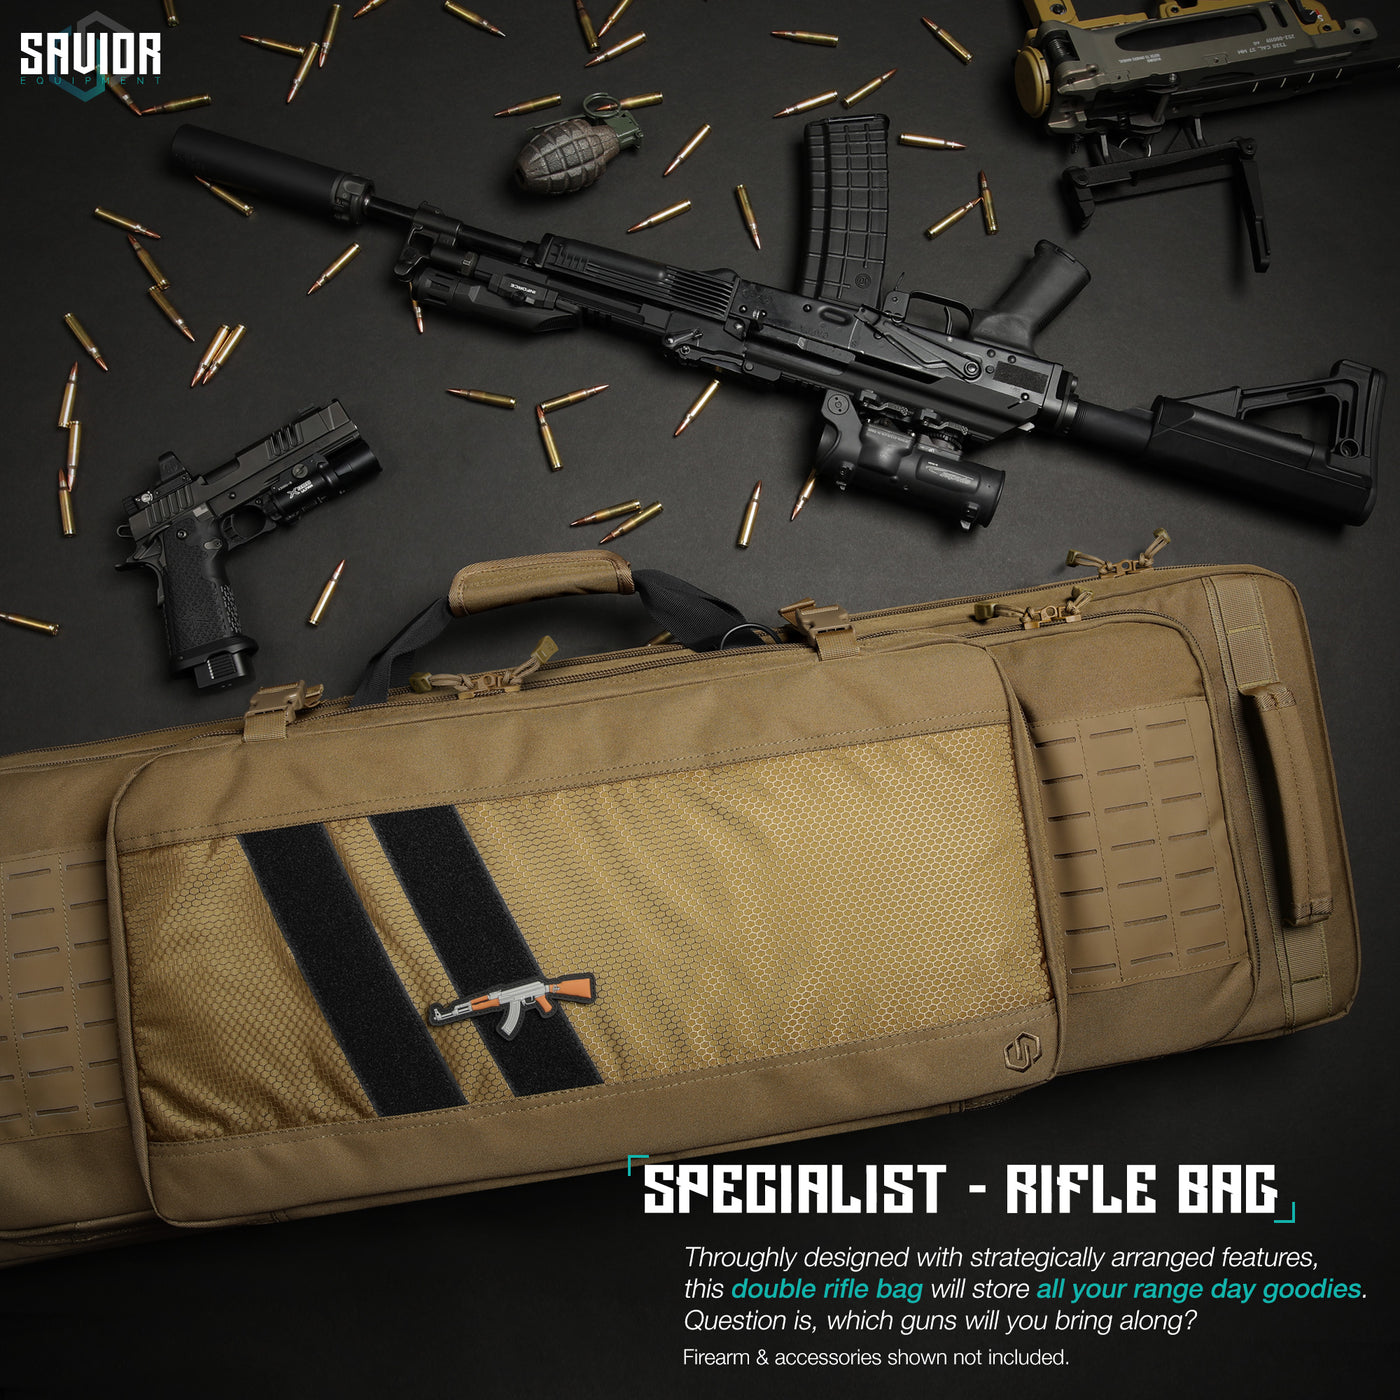 Specialist - Rifle Bag - Throughly designed with strategically arranged features, this double rifle bag will store all your range day goodies. Question is, which guns will you bring along? Firearms & accessories shown not included.